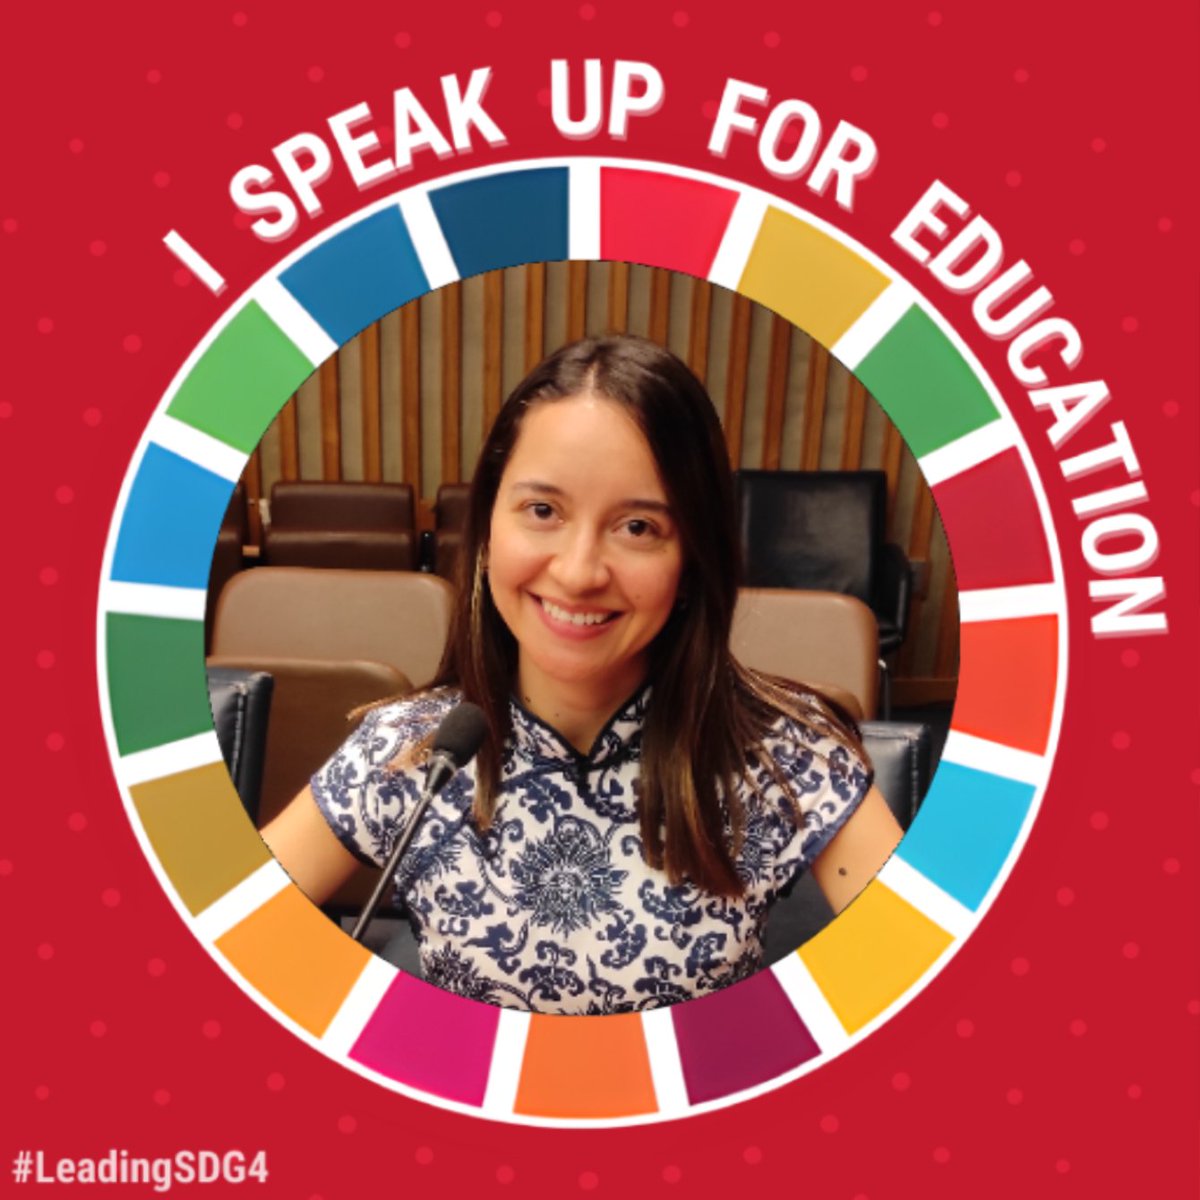 Education is a basic human right ➡️ This #EducationDay let's call on world leaders to invest in education ✏️. Join me #LeadingSDG4 now @UNYouthEnvoy @EdnaBonillaSeba

@Education2030UN @TransformingEdu #SDG4YouthNetwork